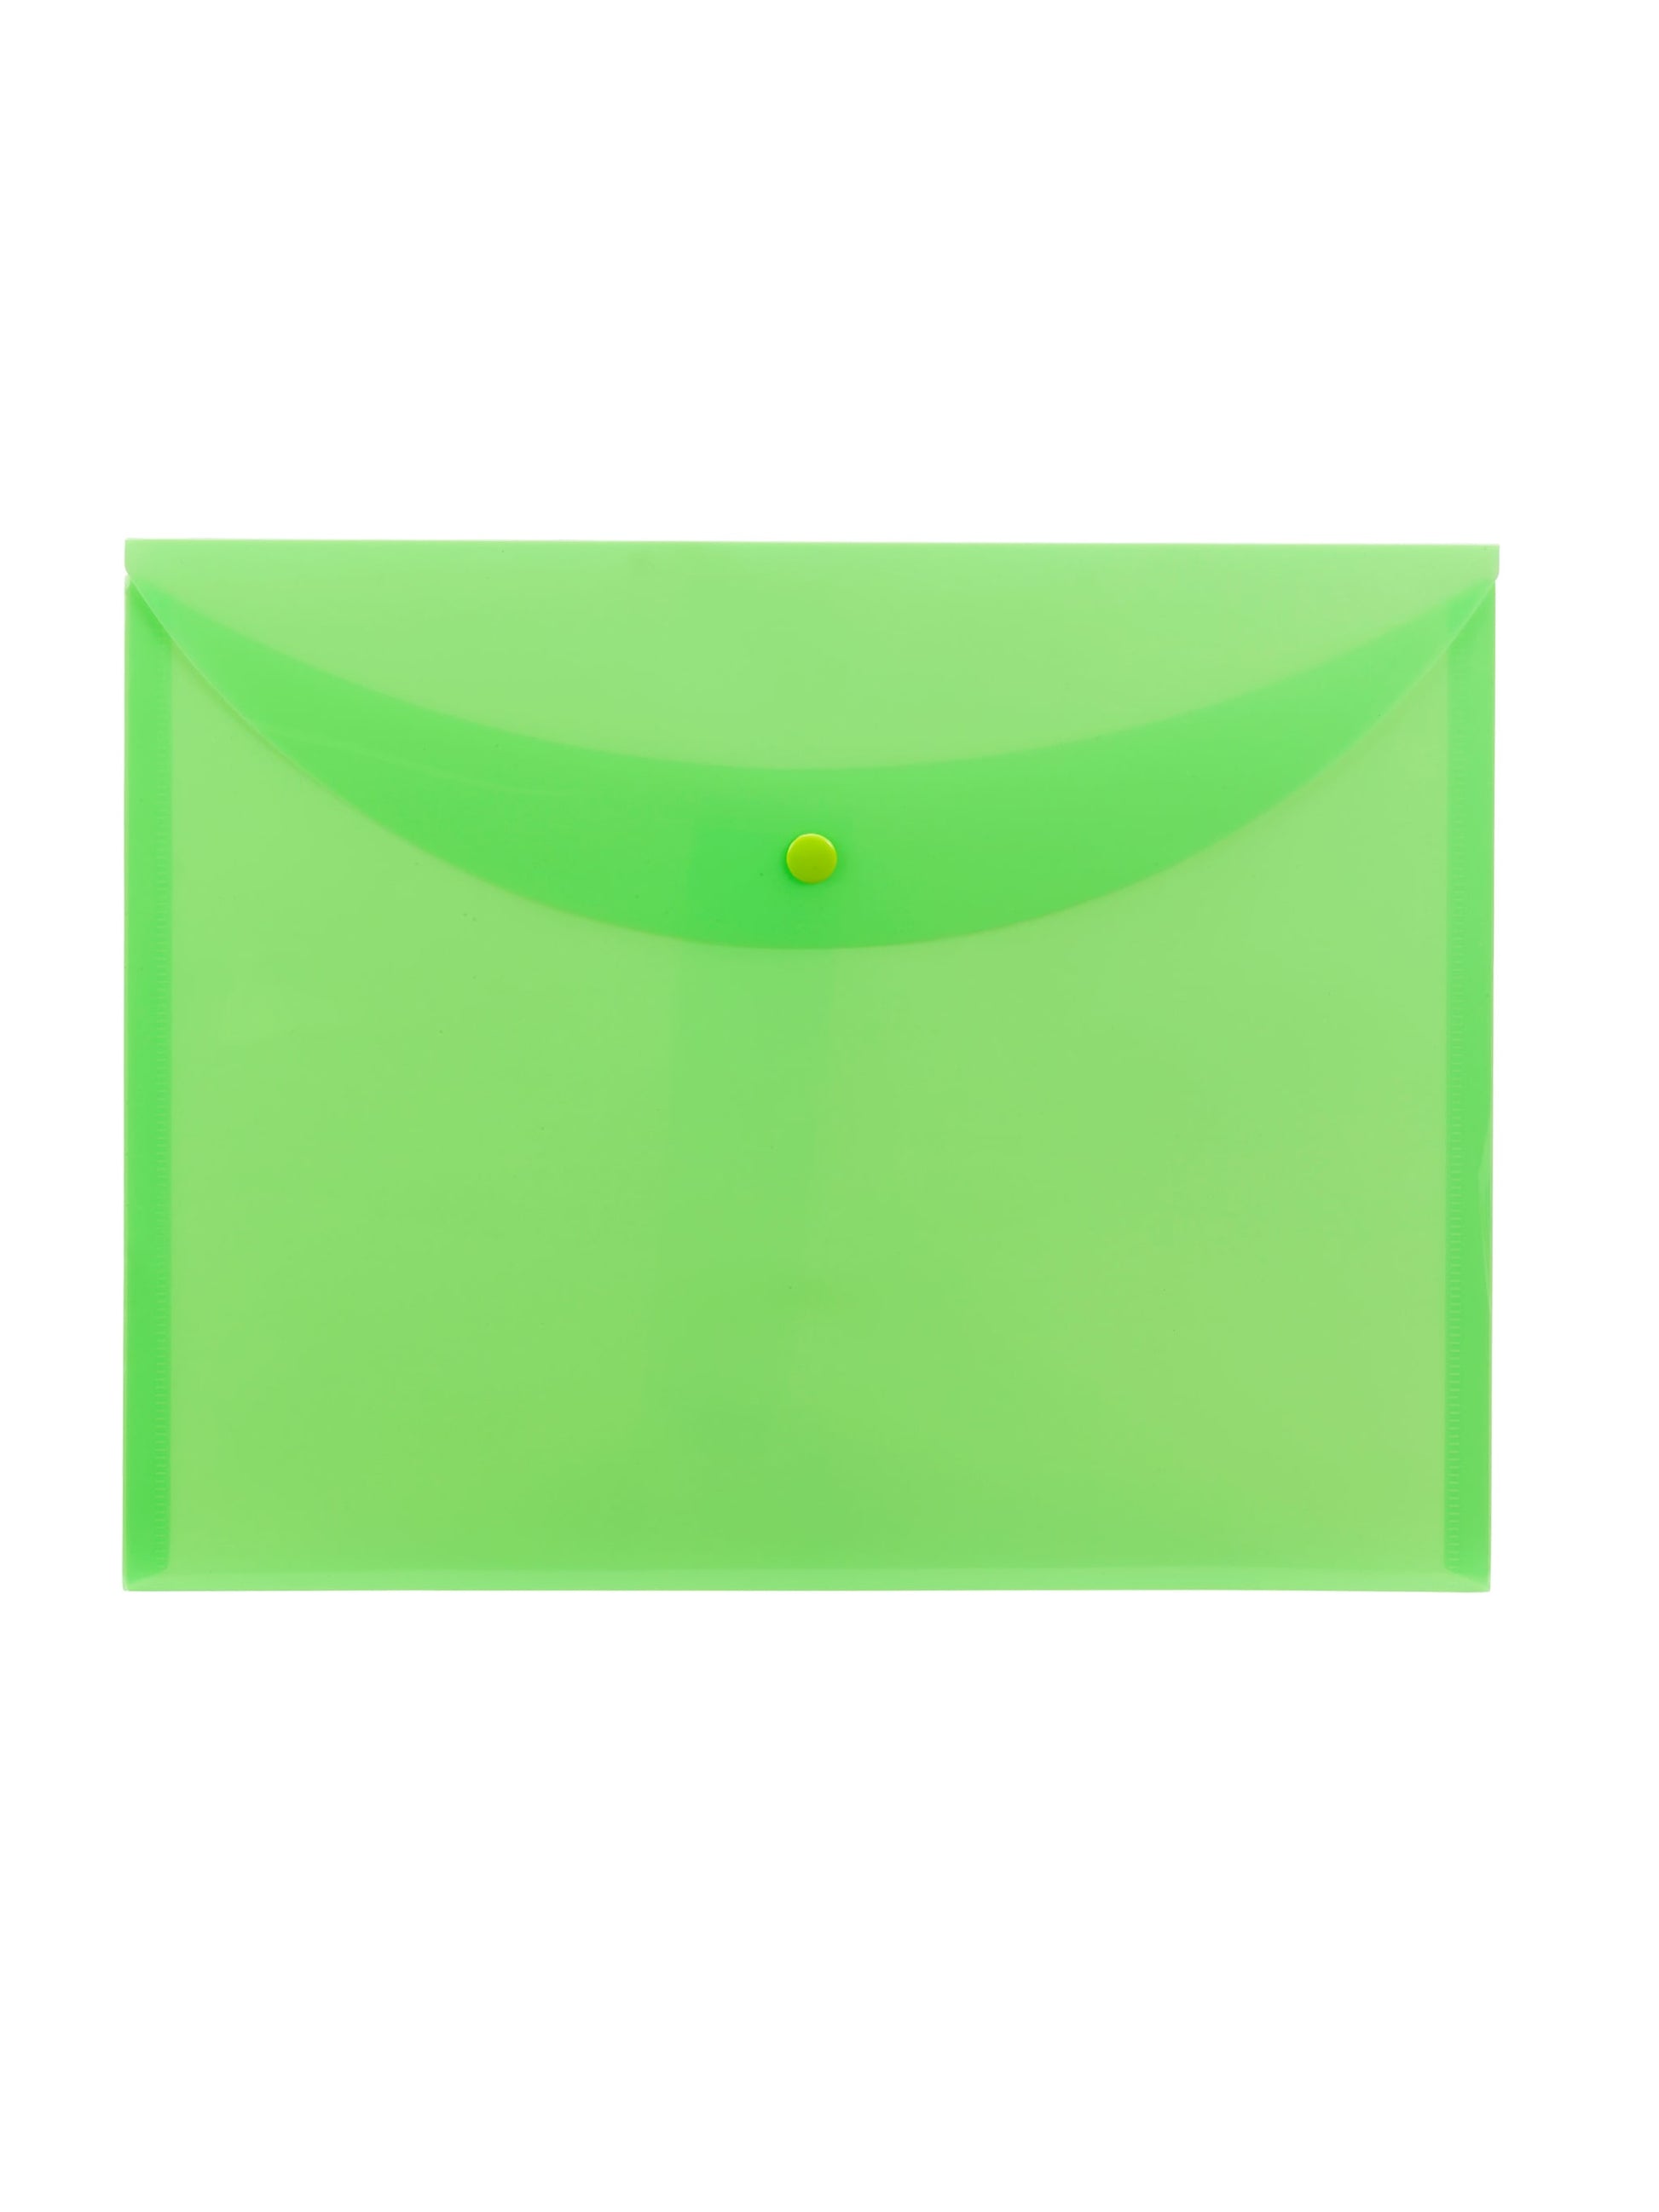 Poly Document Holders, Green Color, Letter Size, Set of 10, 086486896832